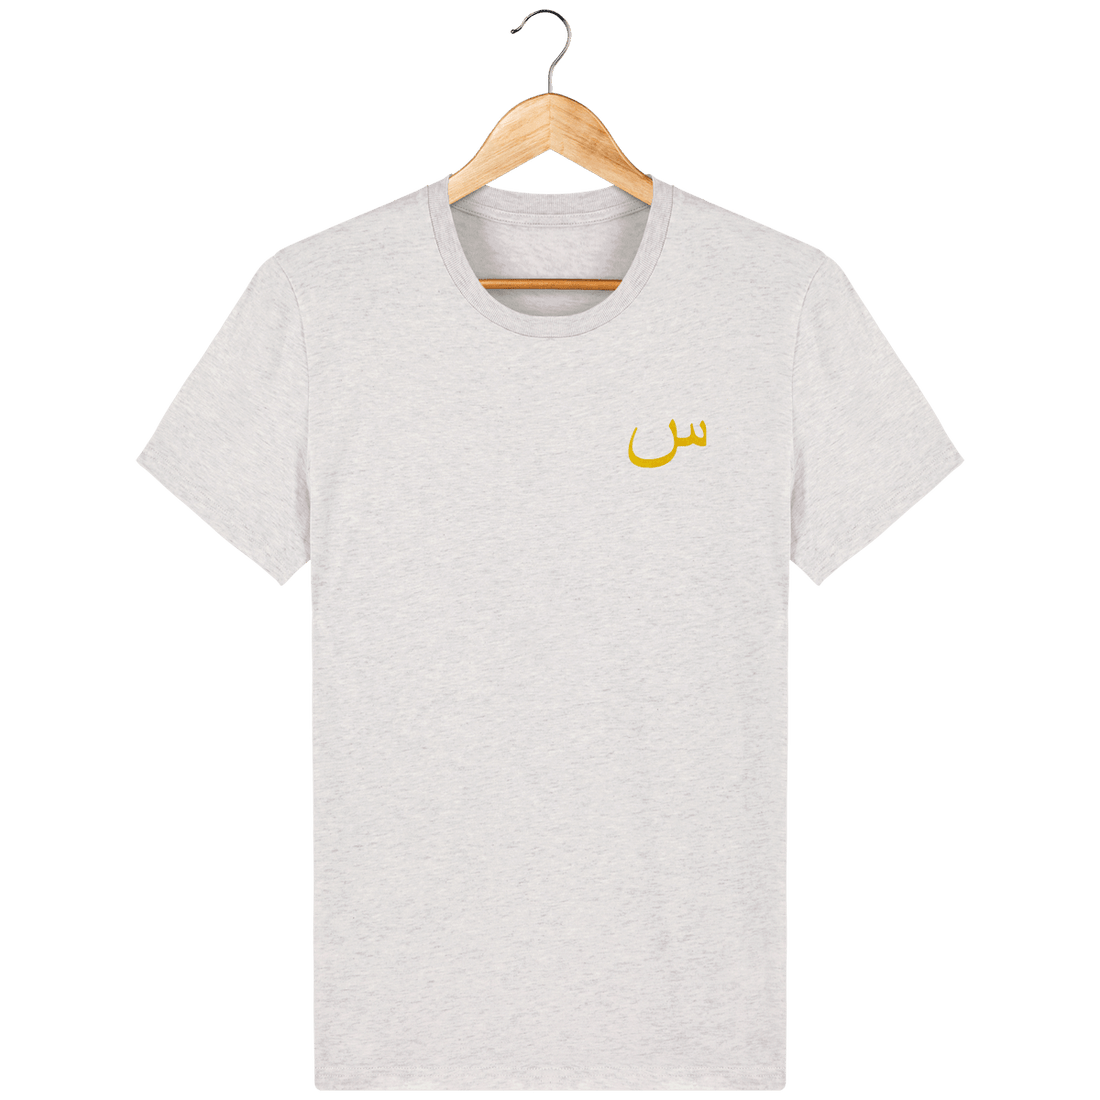 Unisexe>Tee-shirts - T-Shirt Homme <br> Lettre Arabe Siin